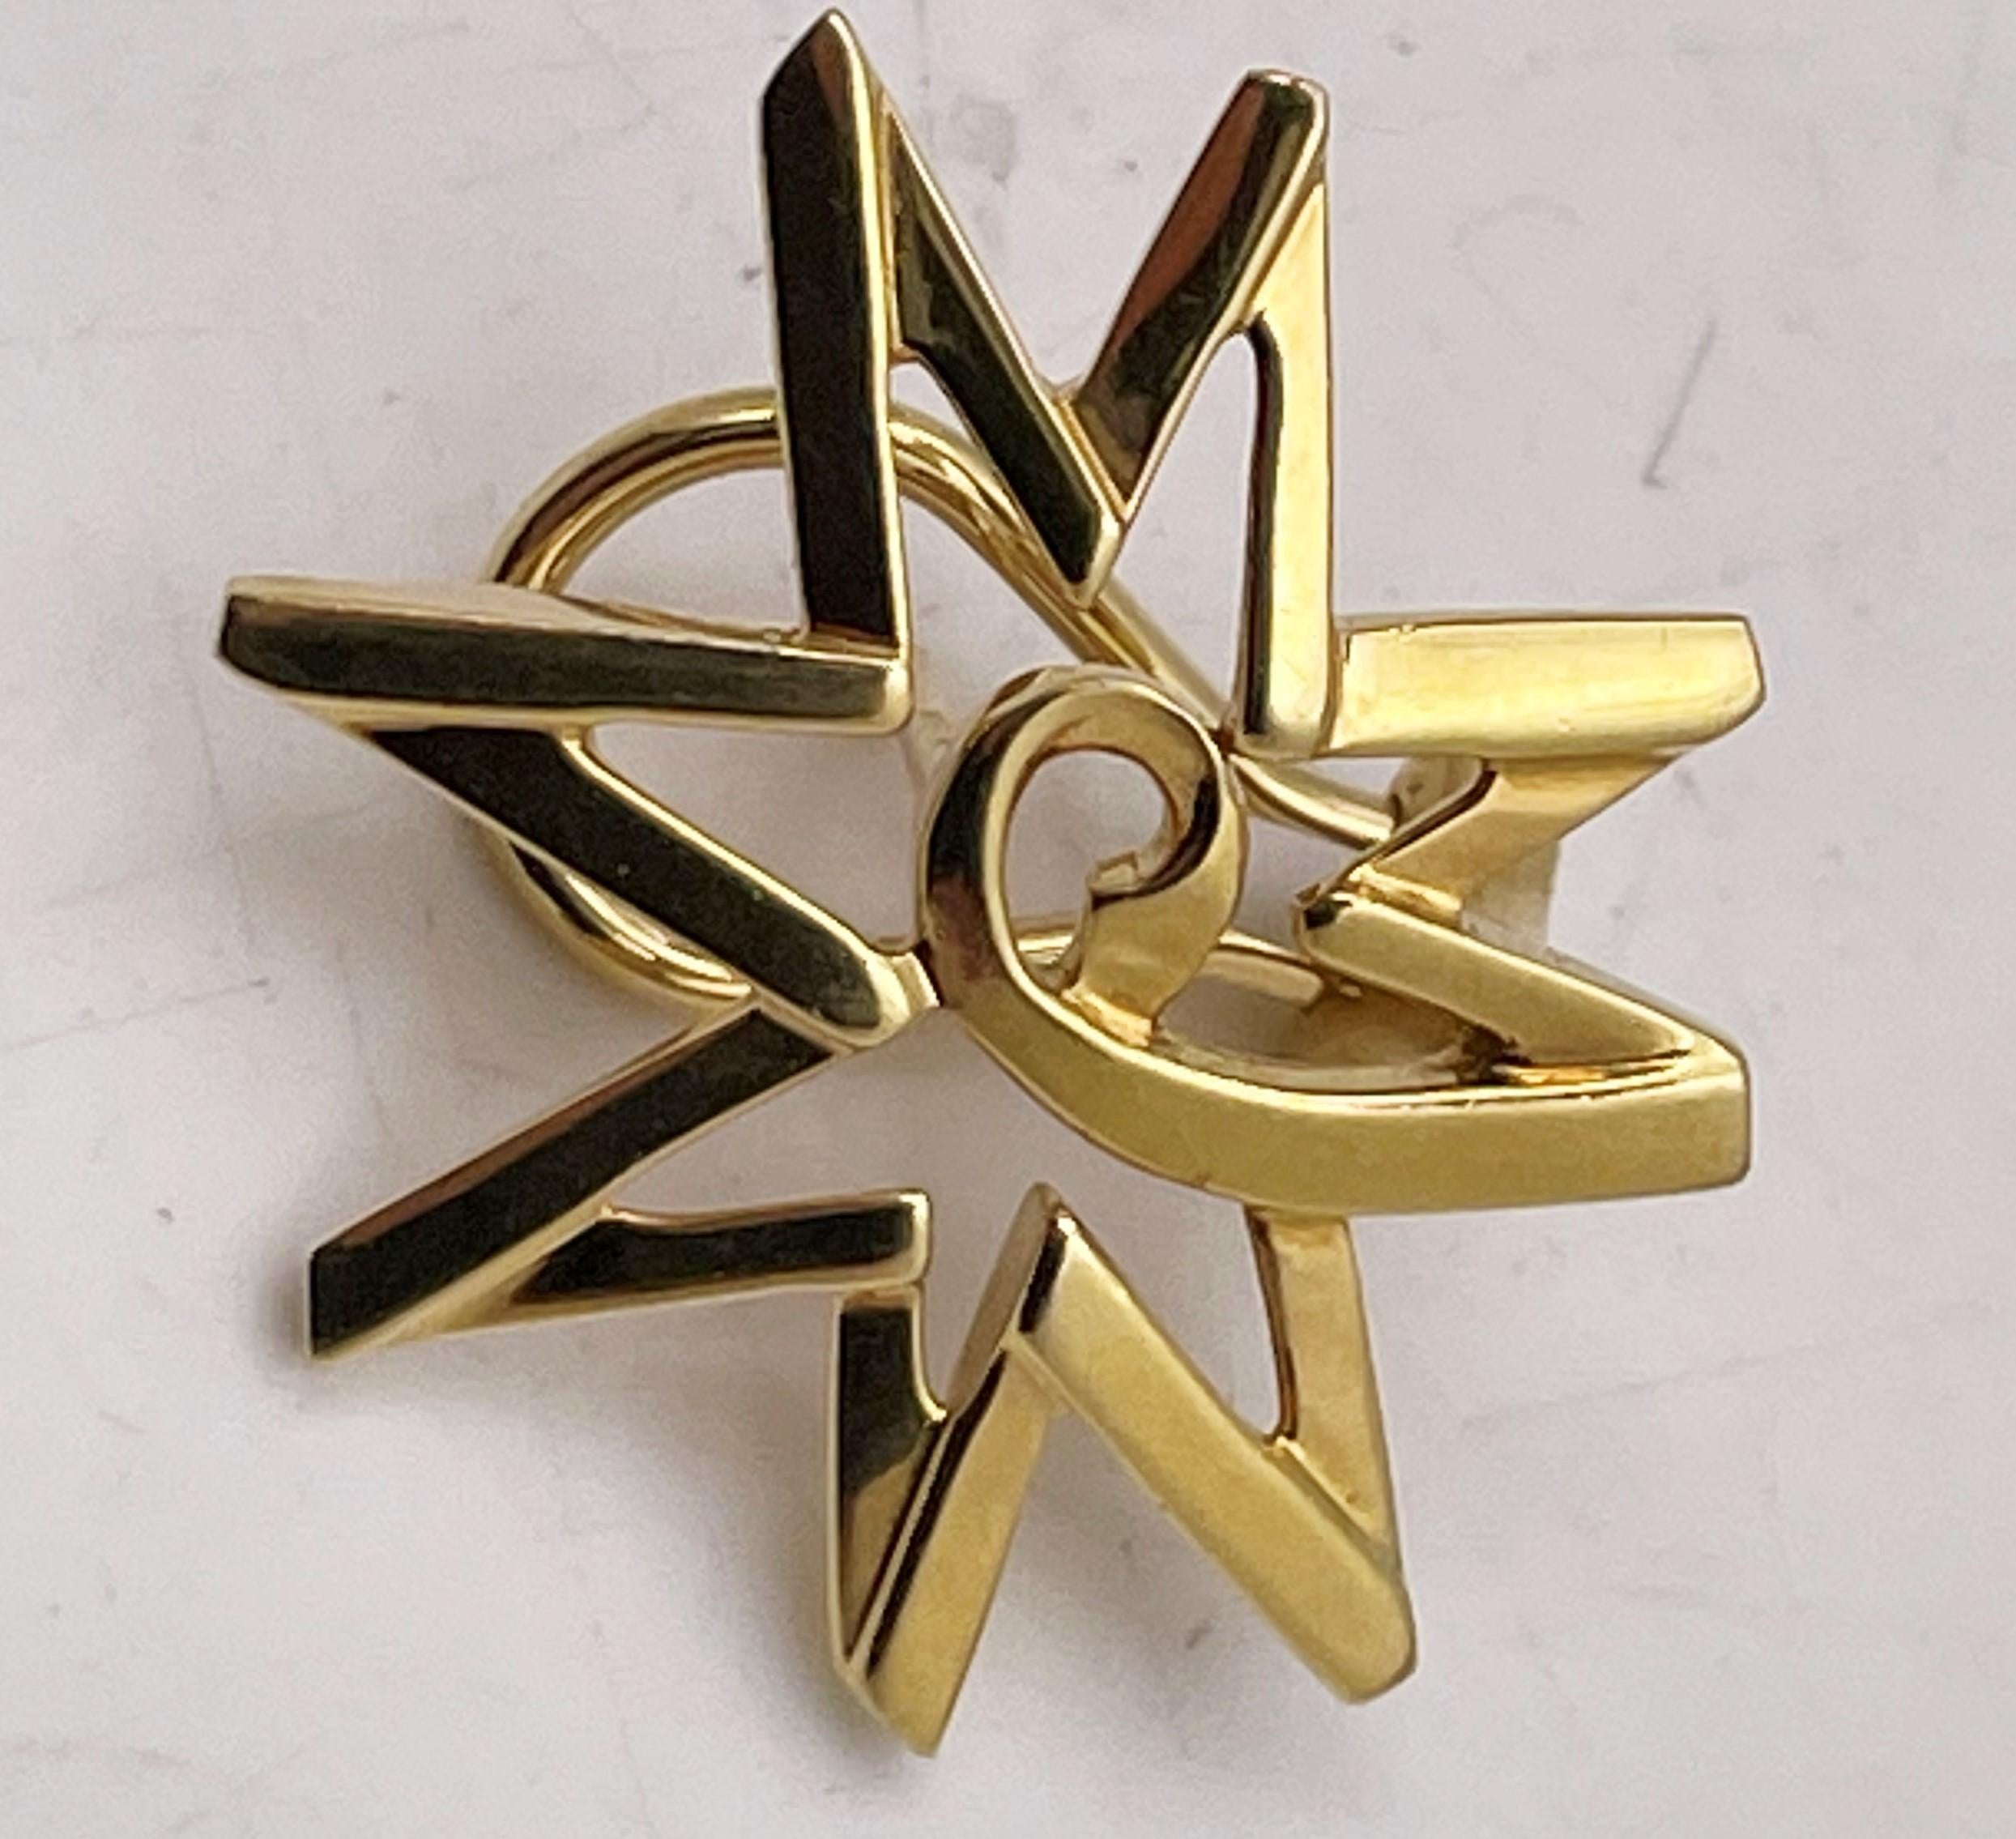 Tiffany & Co. 18k yellow gold rare starburst earrings, designed by Paloma Picasso, with a beautiful, geometric design. They measure 1'' in diameter by 1/4'' in depth, weigh 10.5 grams (0.338 ozt), and bear hallmarks as shown. Sold in original